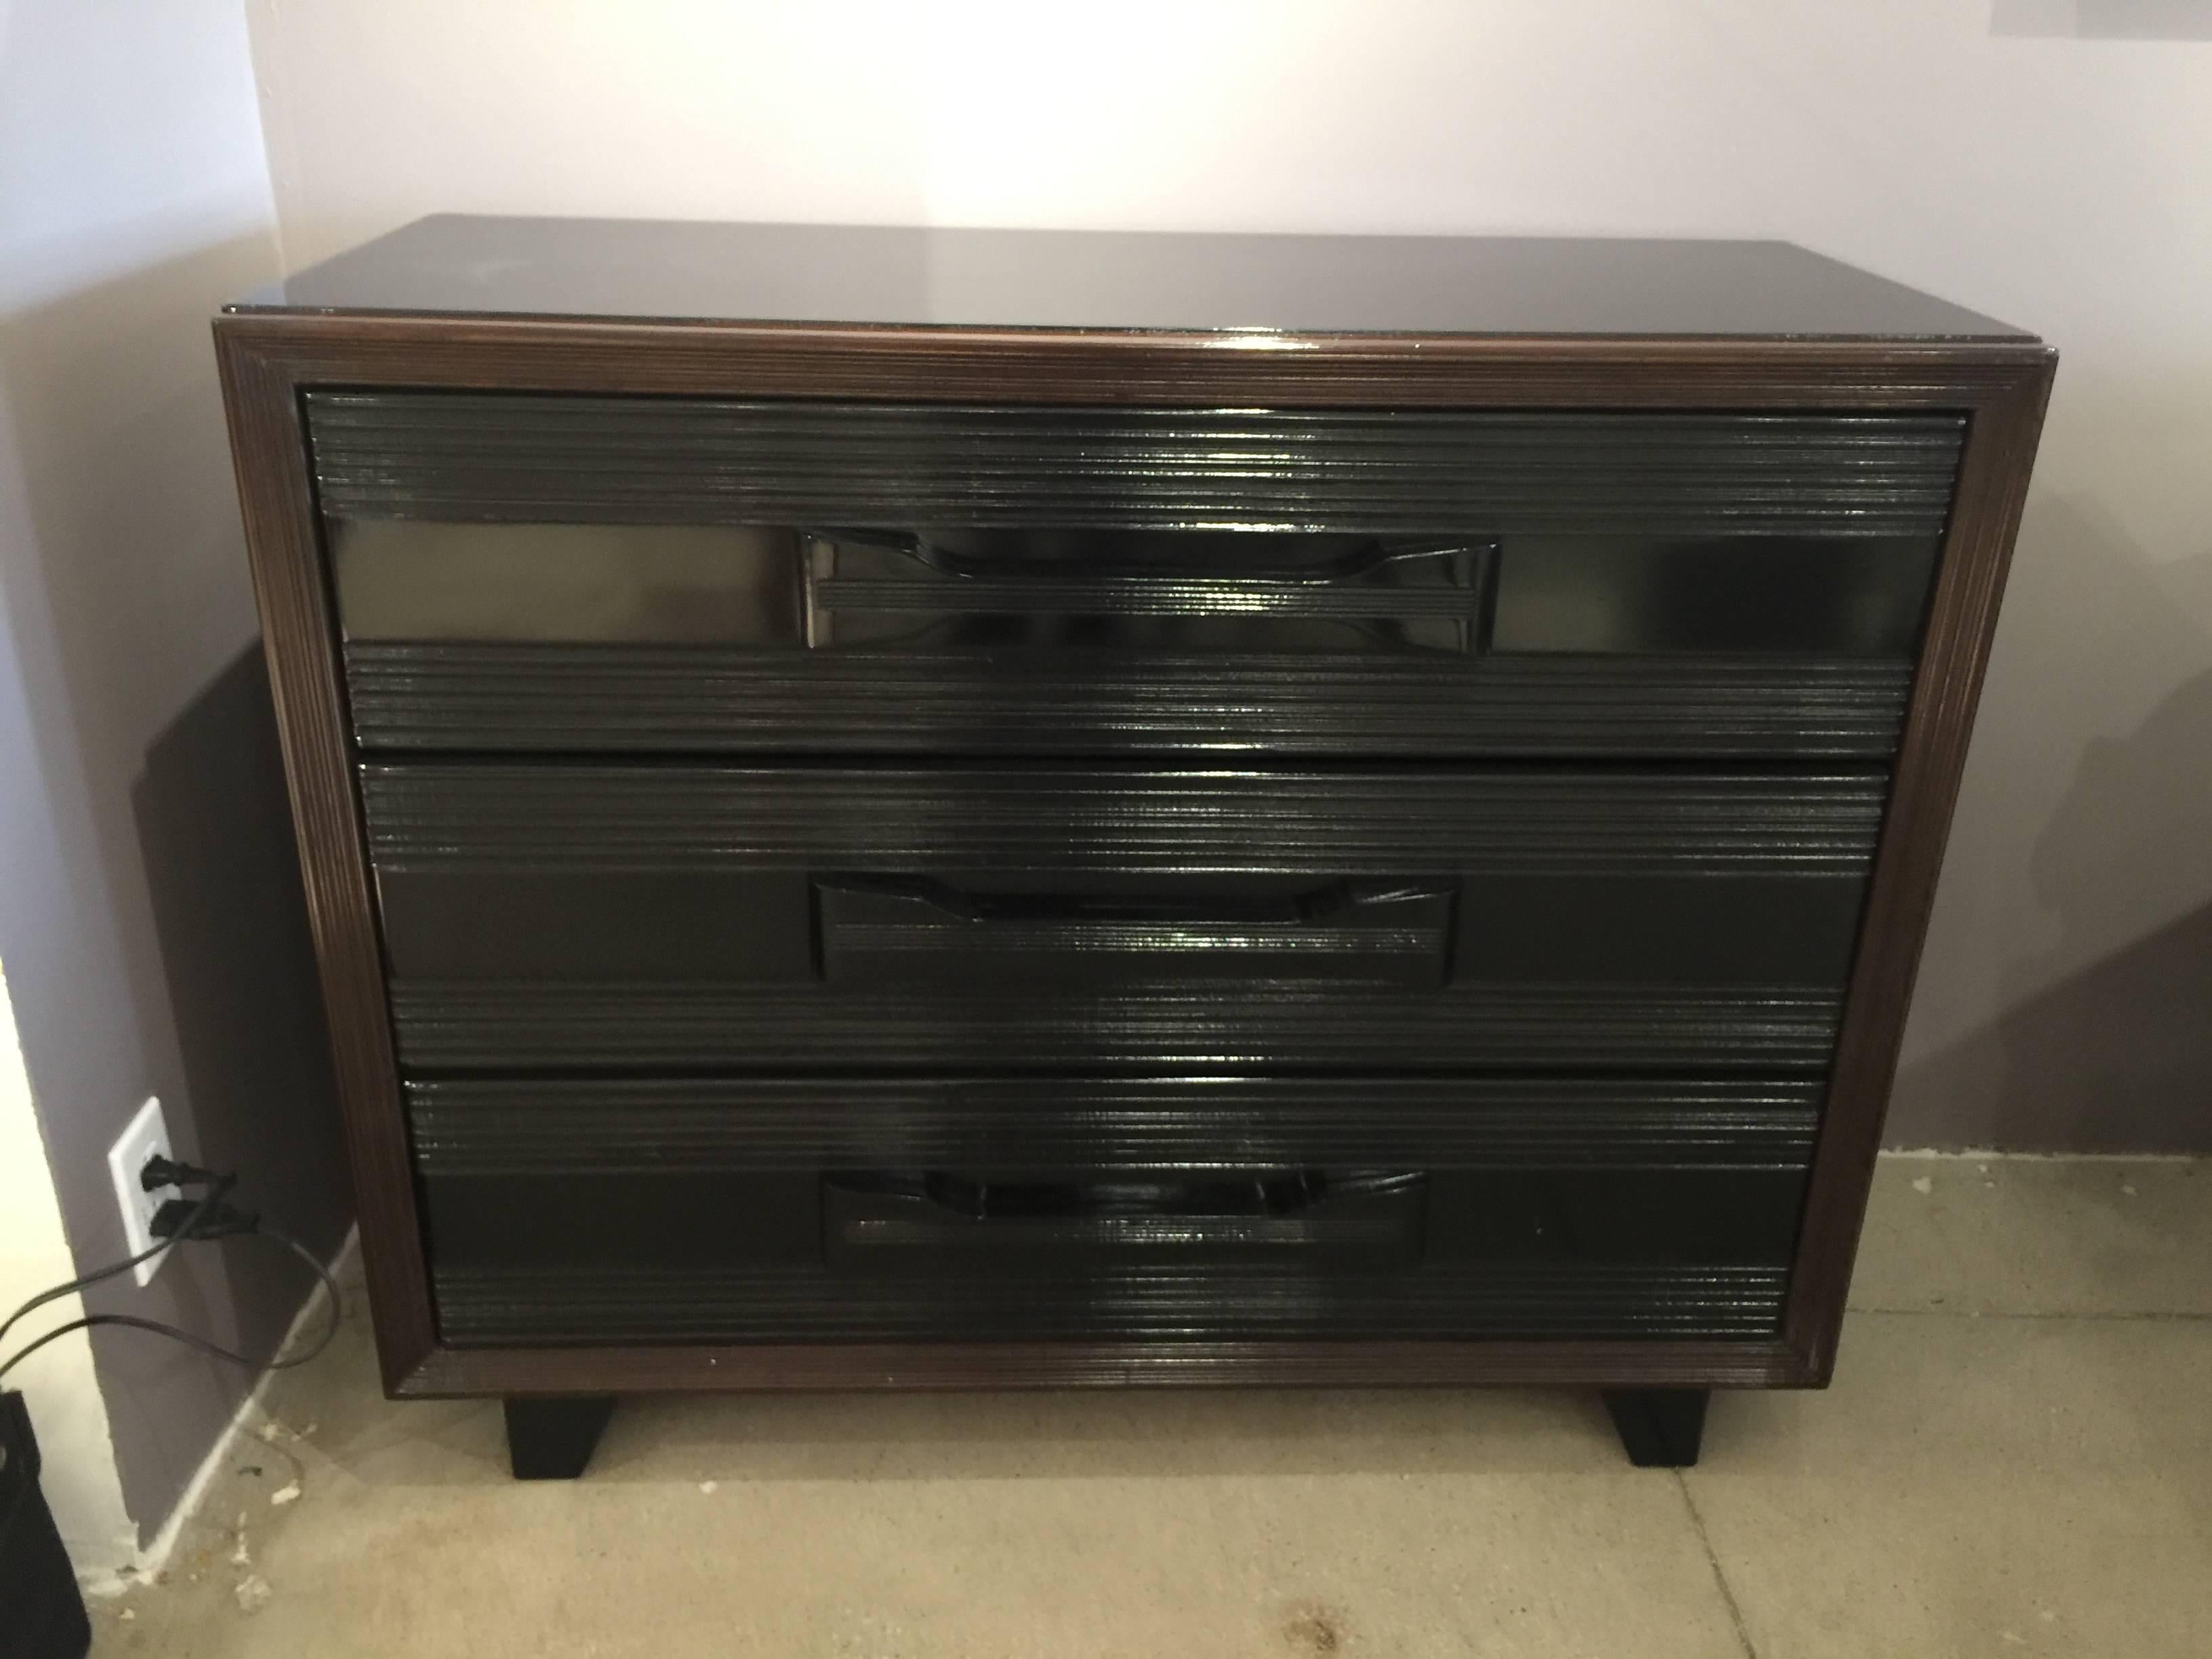 Three large drawers (top one with removable dividers) with Art Deco streamlined design and finished with piano quality lacquer black with deep mahogany brown trim. These are a pair.